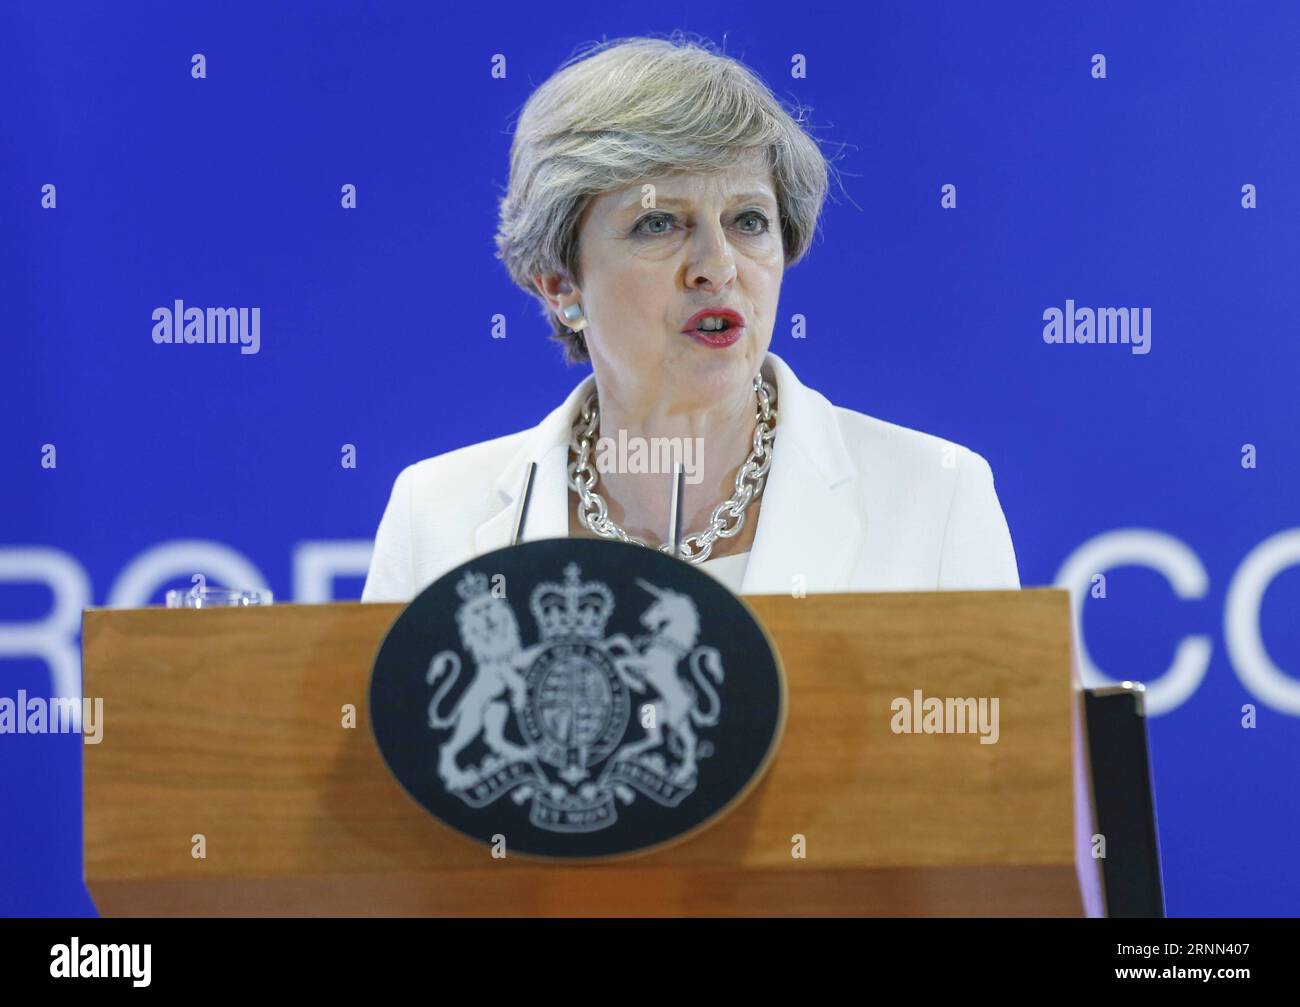 (170623) -- BRUSSELS, June 23, 2017 -- British Prime Minister Theresa May attends a press conference at the end of a two-day EU Summit in Brussels, Belgium, June 23, 2017. ) (zf) BELGIUM-BRUSSELS-EU-SUMMIT YexPingfan PUBLICATIONxNOTxINxCHN   Brussels June 23 2017 British Prime Ministers Theresa May Attends a Press Conference AT The End of a Two Day EU Summit in Brussels Belgium June 23 2017 ZF Belgium Brussels EU Summit YexPingfan PUBLICATIONxNOTxINxCHN Stock Photo